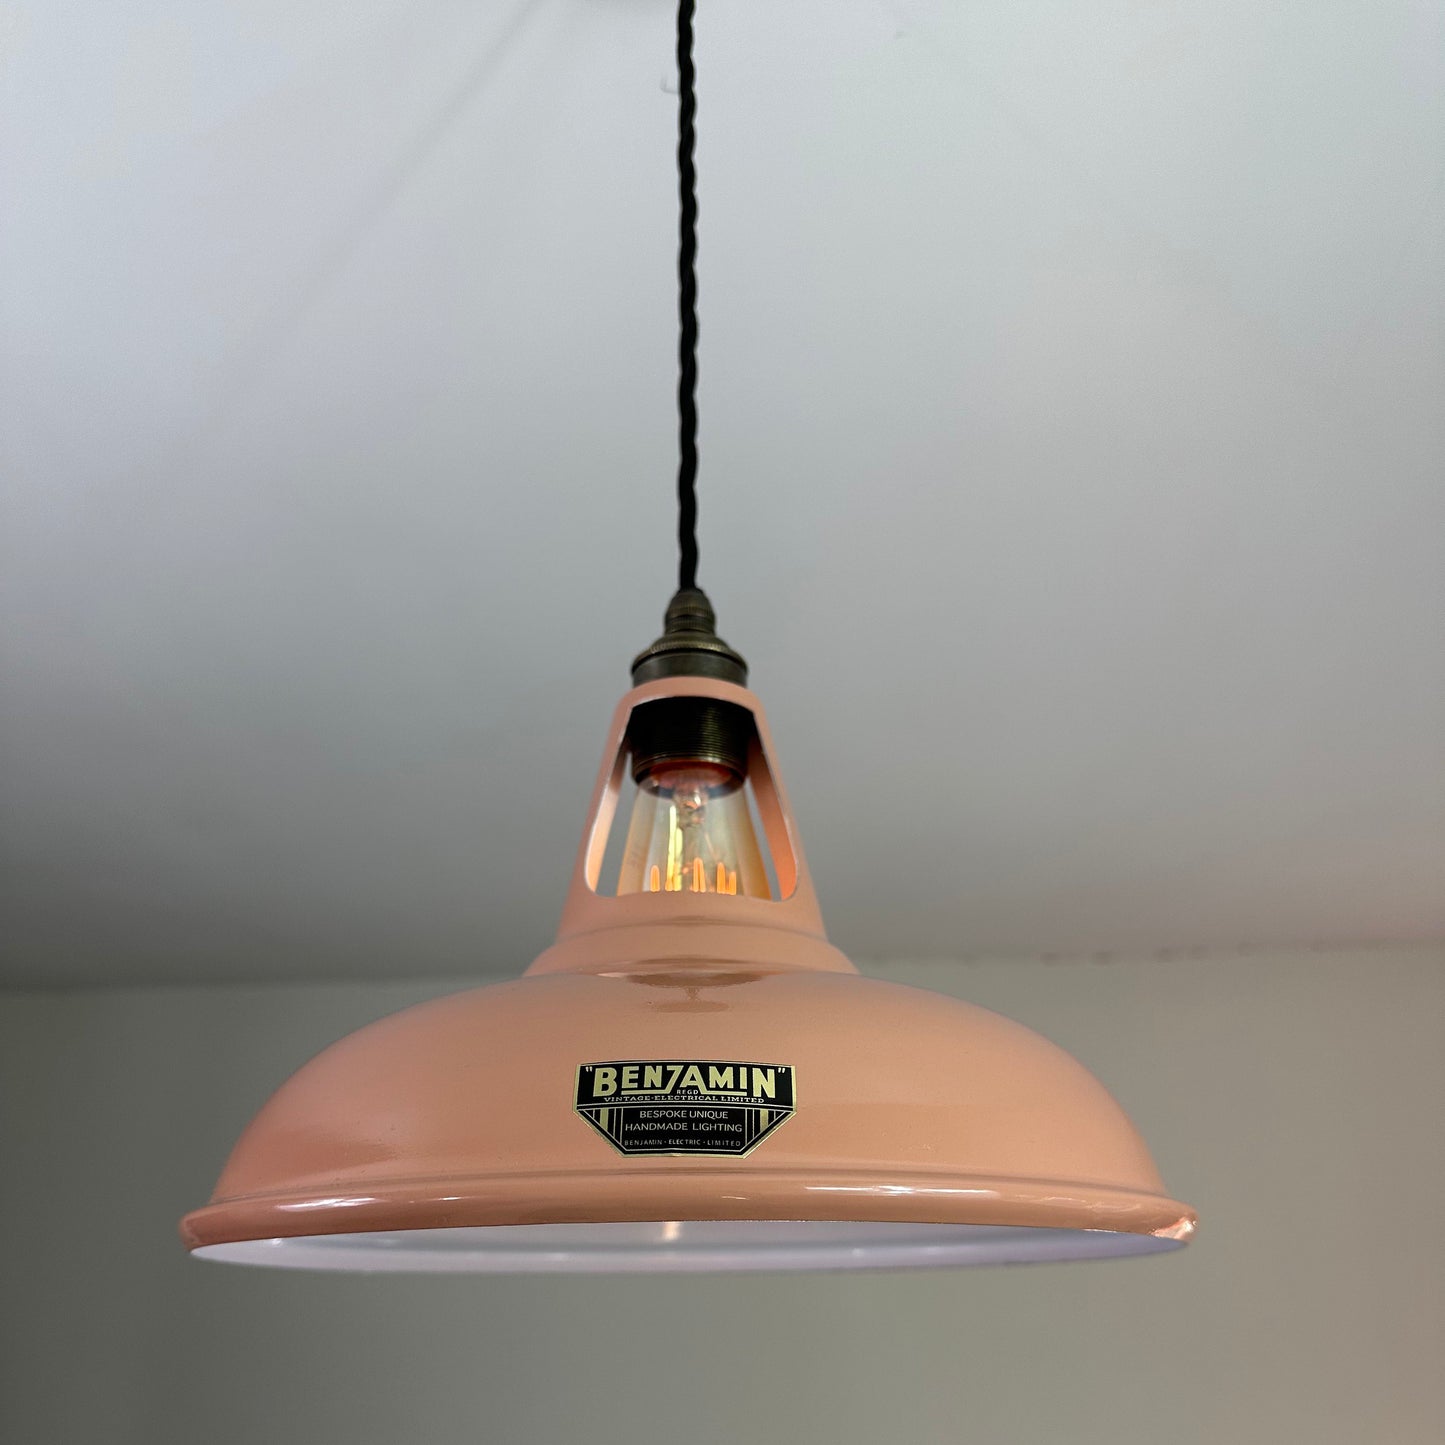 Cawston ~ Terracotta Solid Shade Slotted Design Pendant Set Light Ceiling Dining Room Kitchen Table | Vintage Filament Bulb 11 Inch